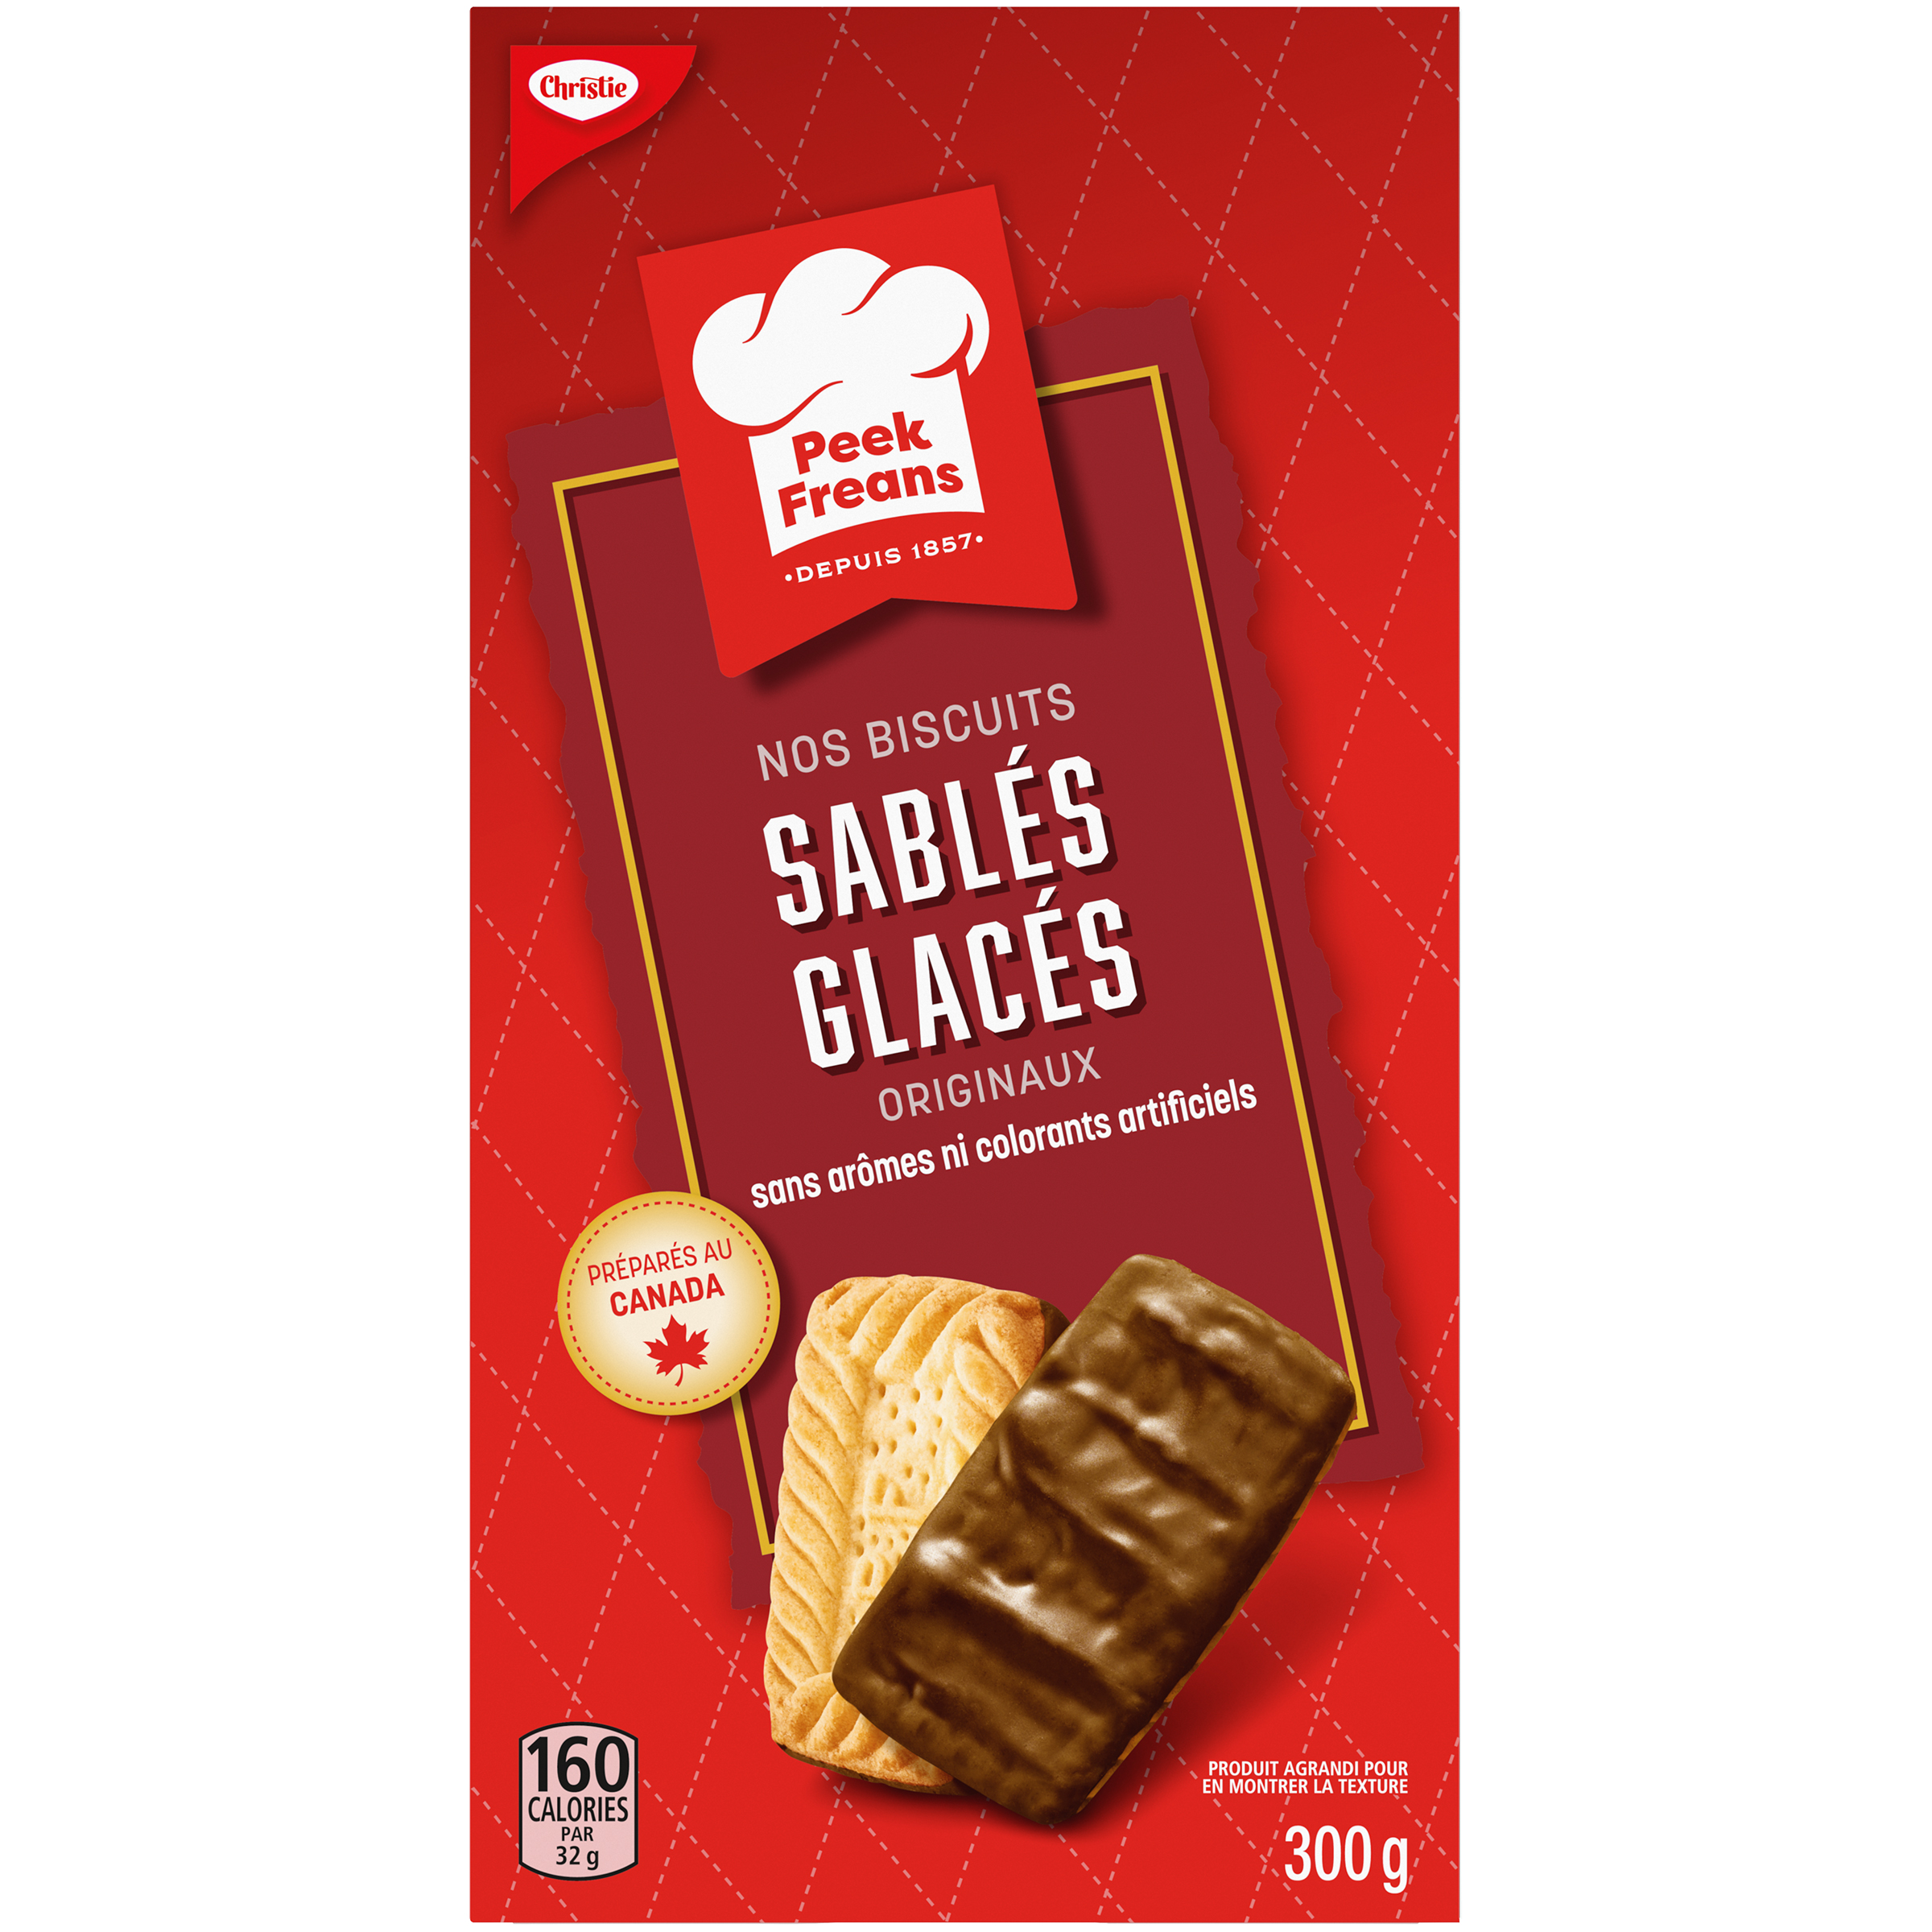 PF SABLES GLACES 300G